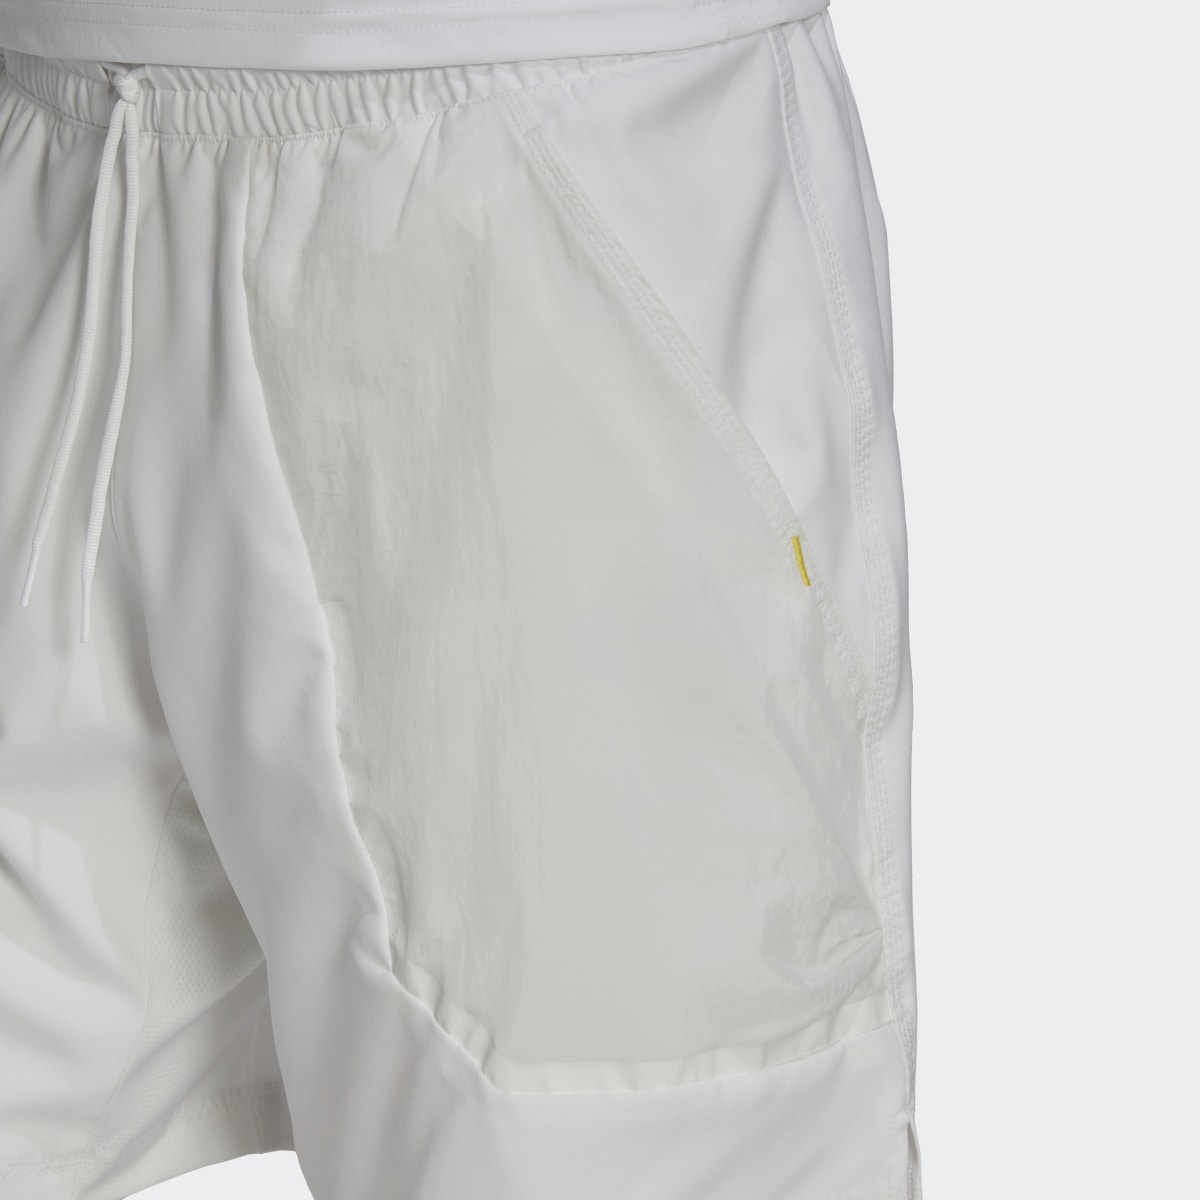 Adidas London Two-in-One Shorts. 5